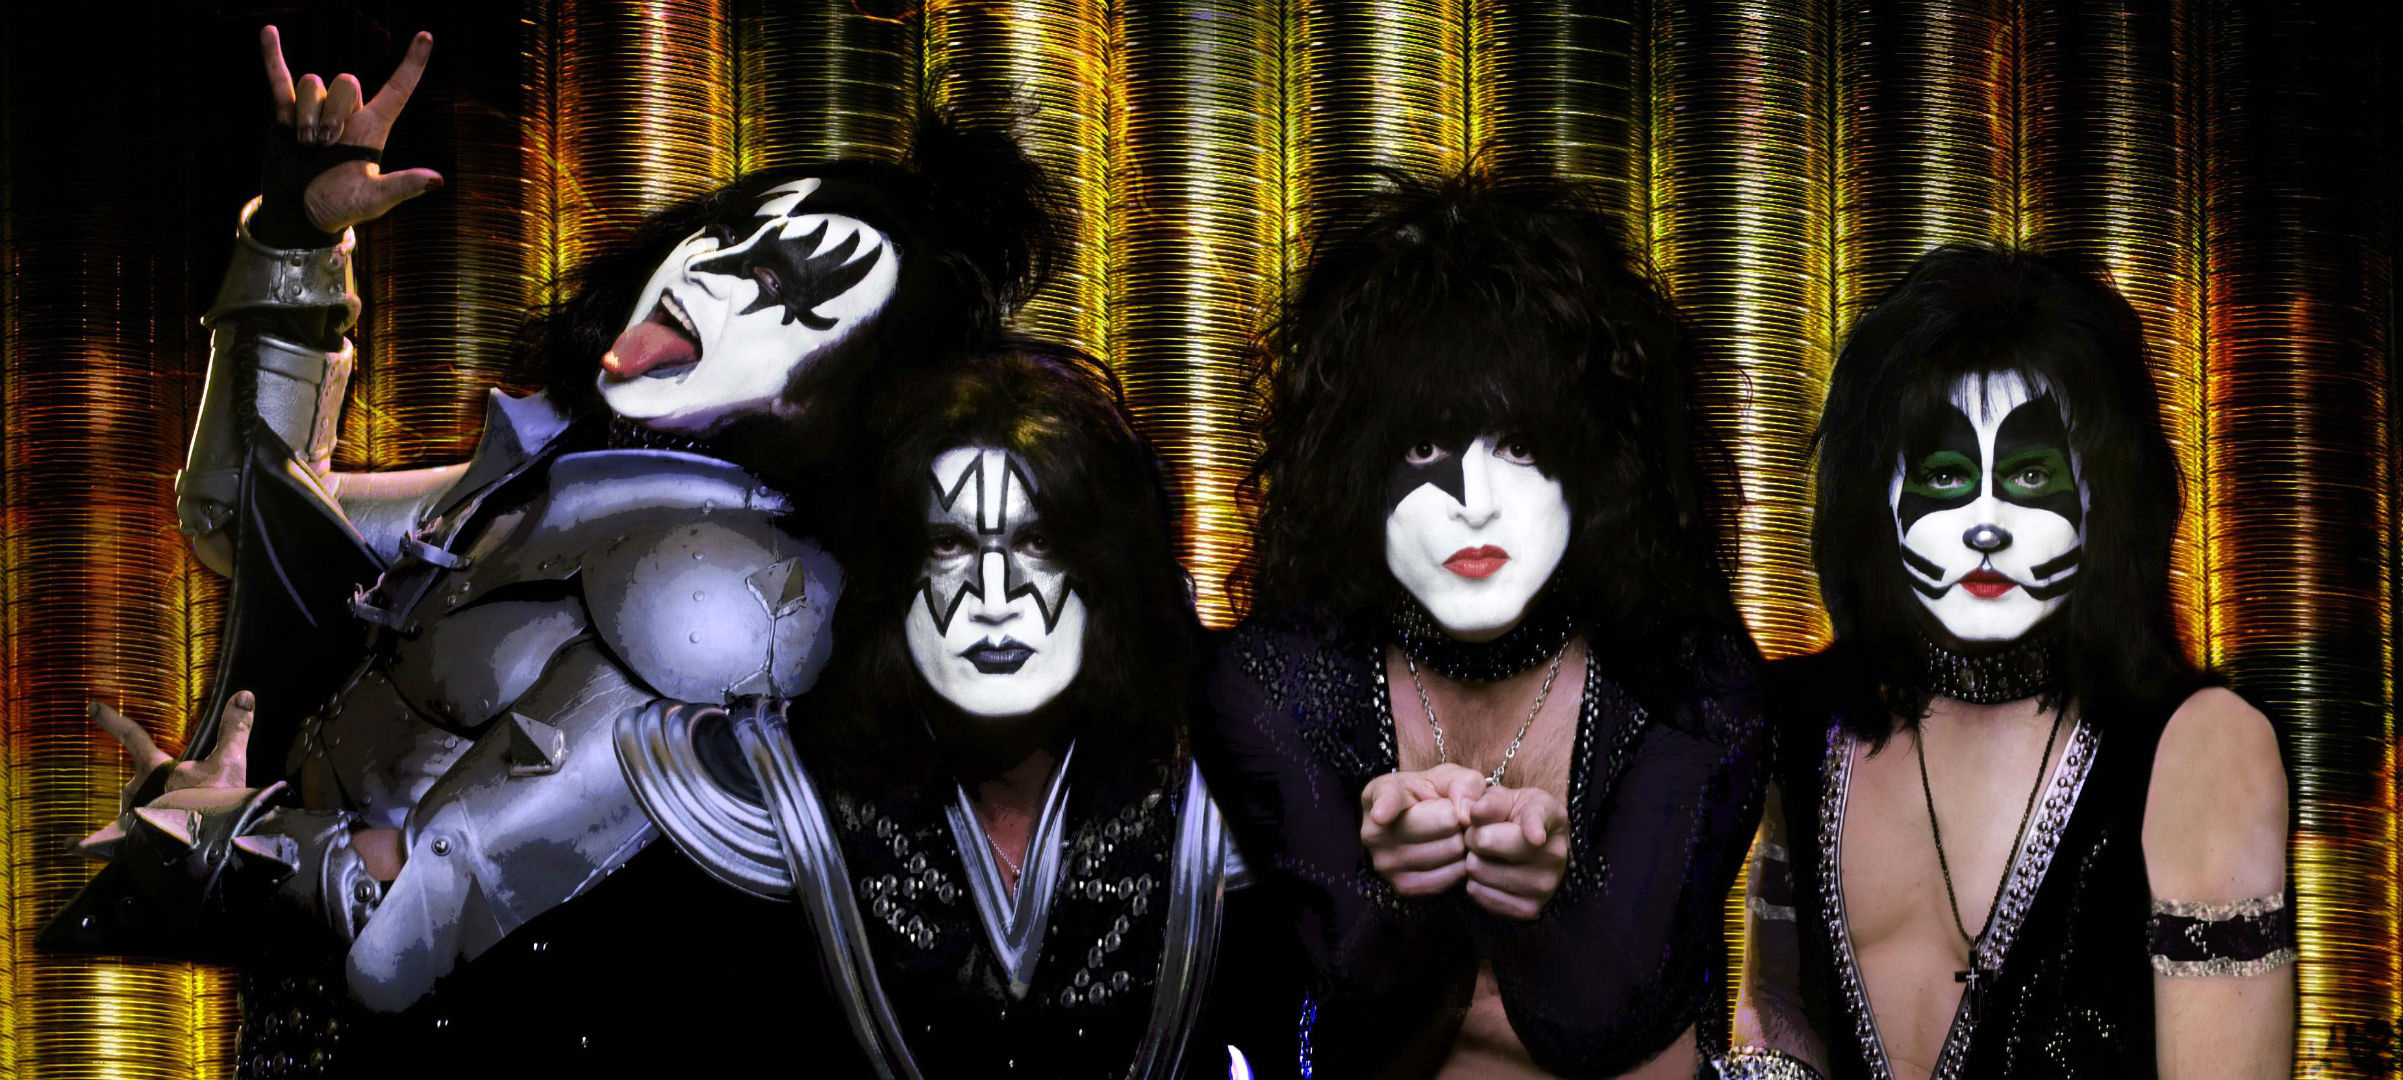 KISS Band, Iconic makeup, Rock and roll legends, Music history, 2410x1080 Dual Screen Desktop